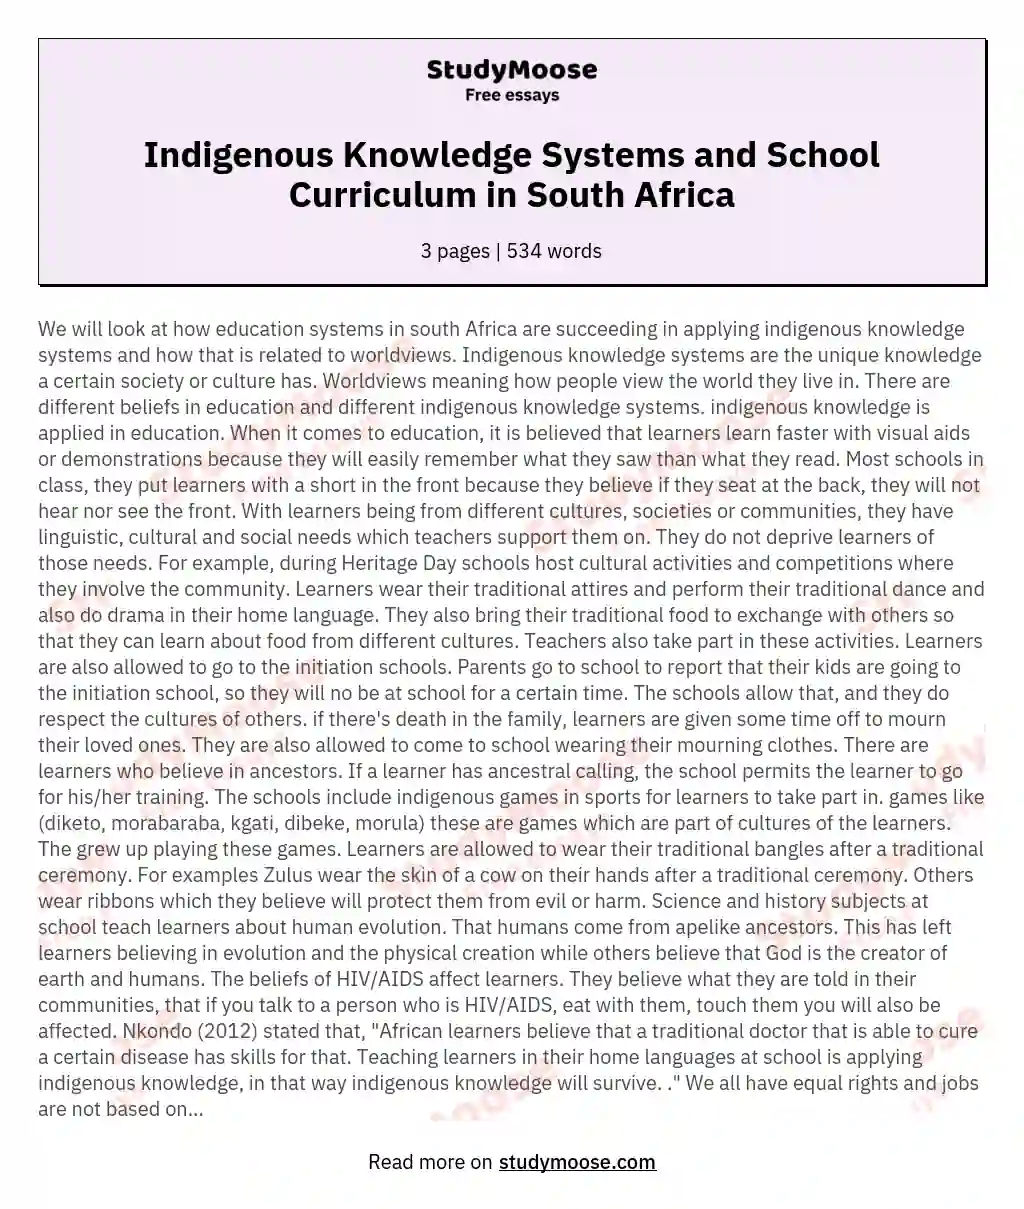 Indigenous Knowledge Systems and School Curriculum in South Africa